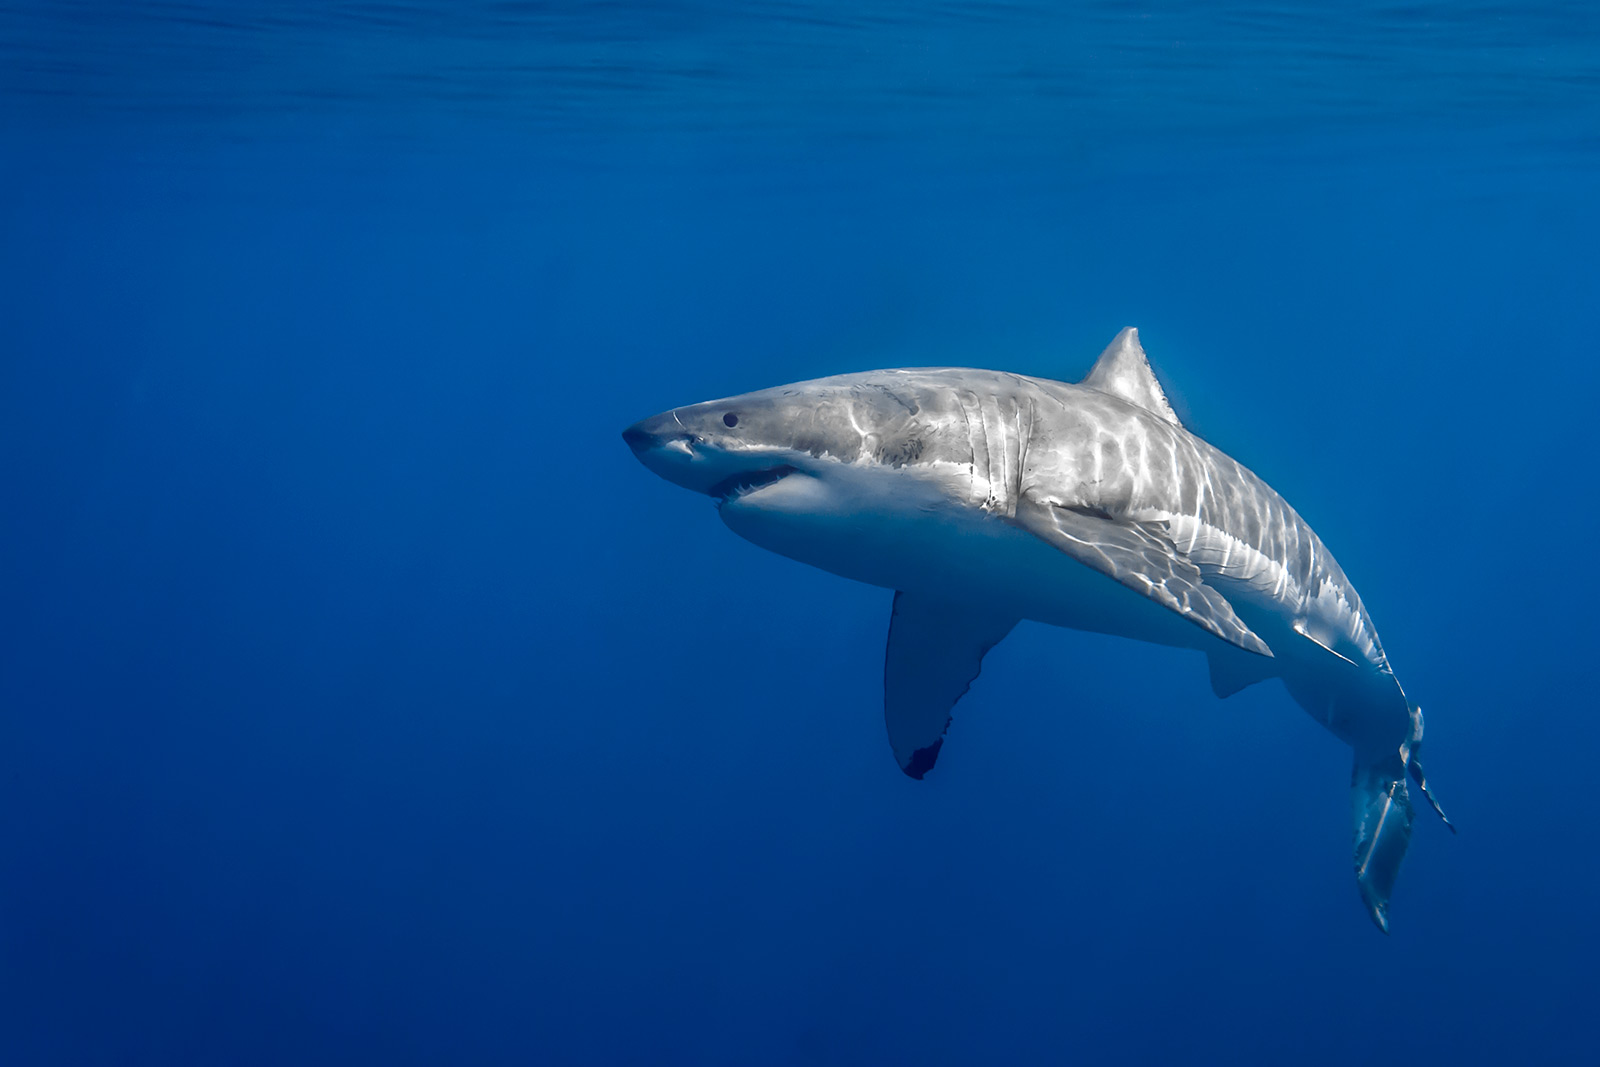 Lucy an female adult shark swimming below the surface image